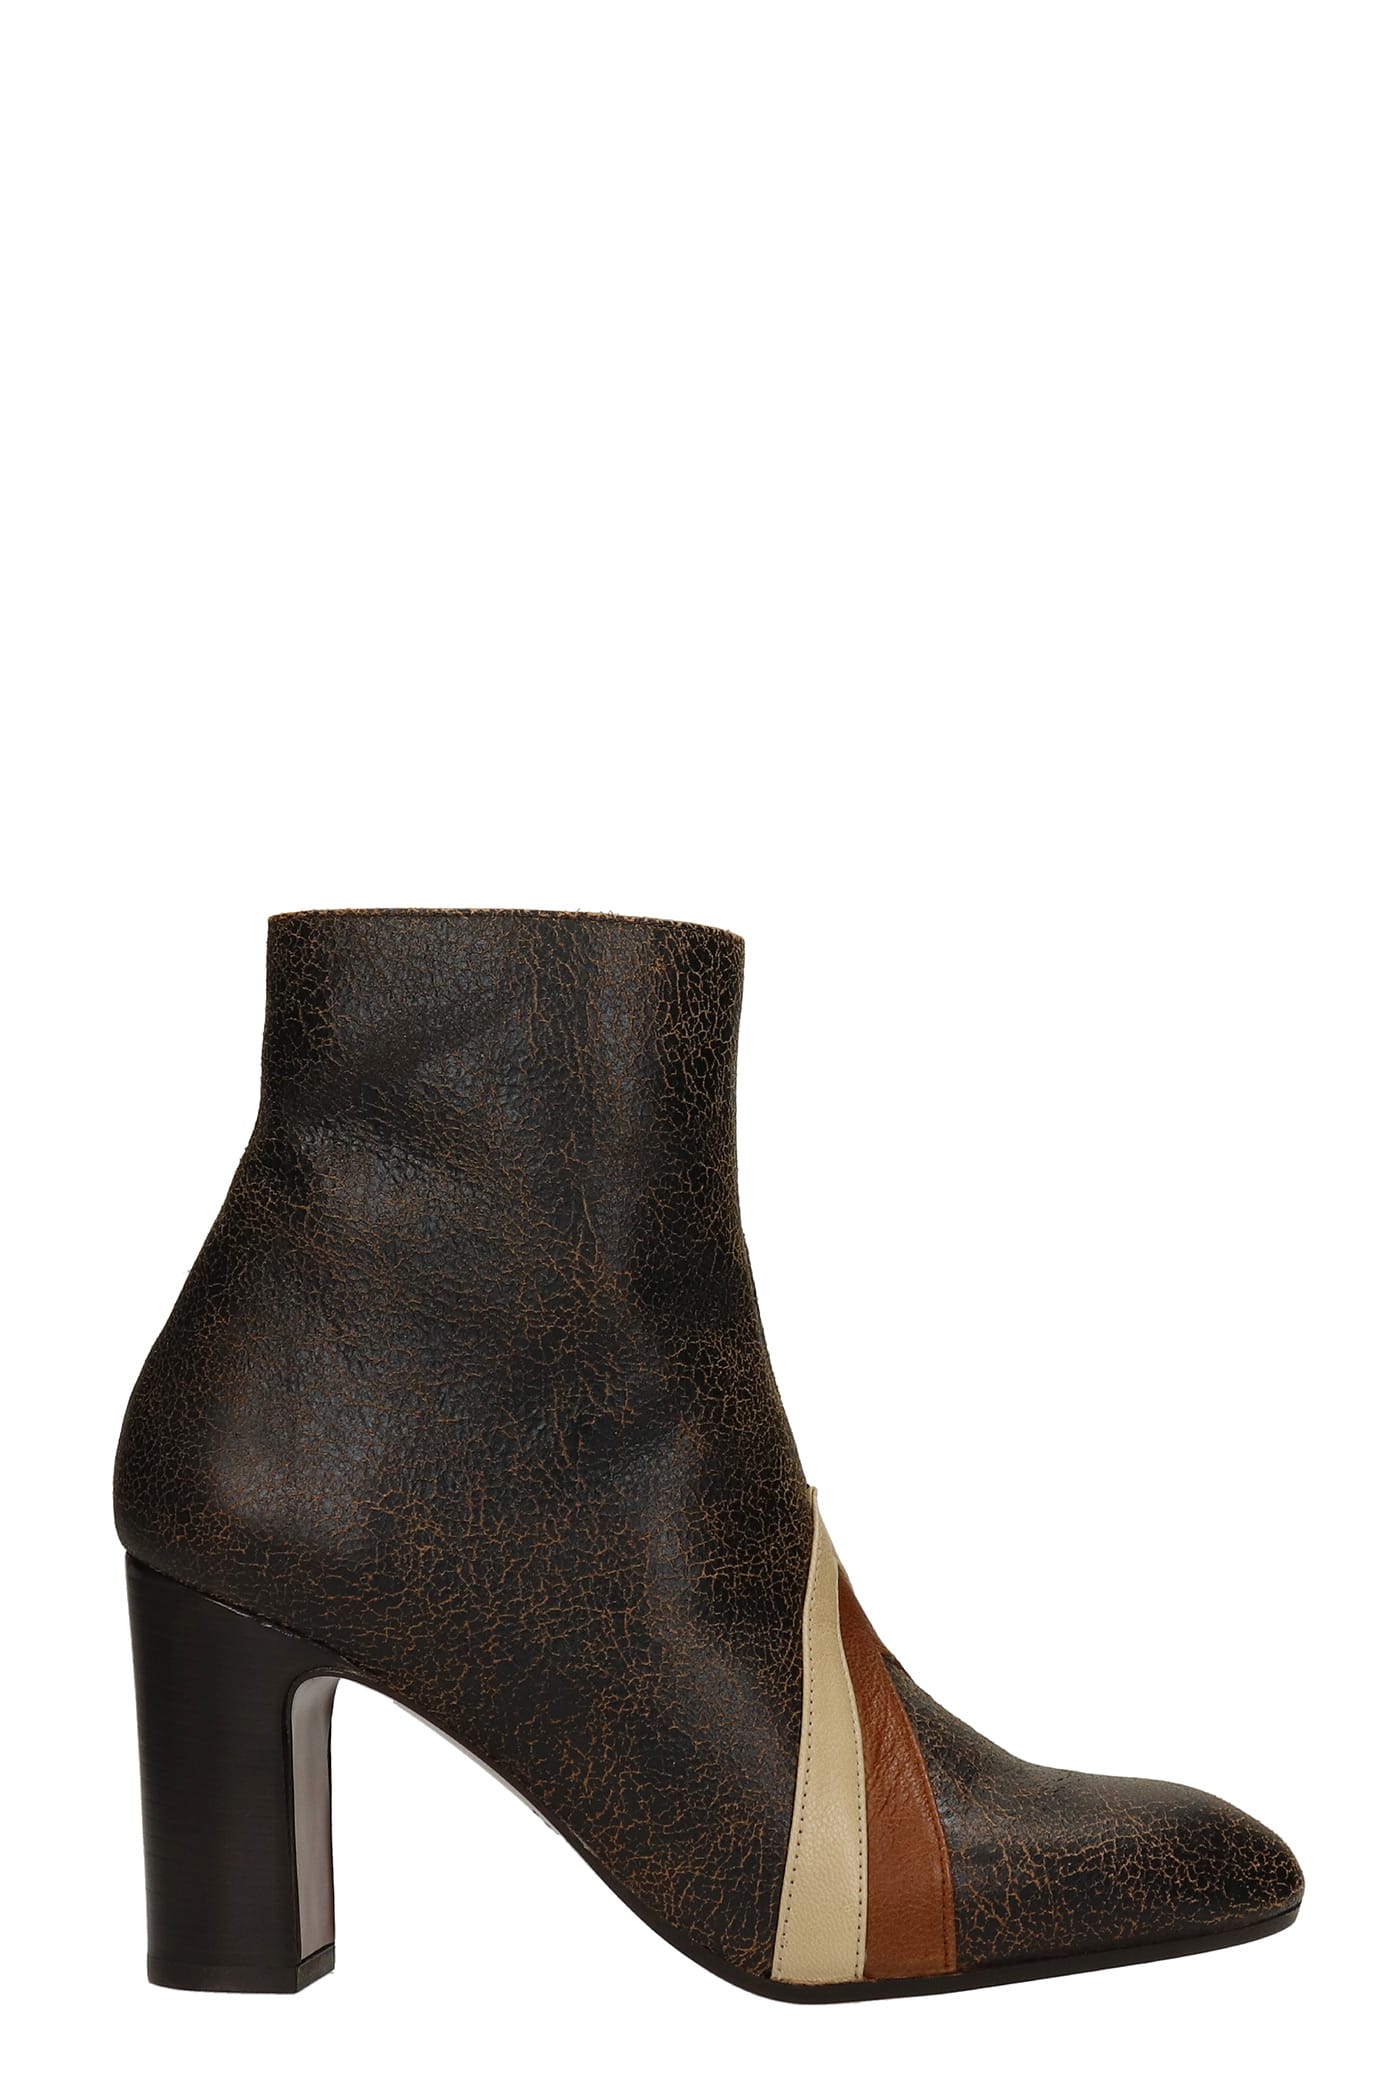 Chie Mihara Eliya High Heels Ankle Boots In Black Leather